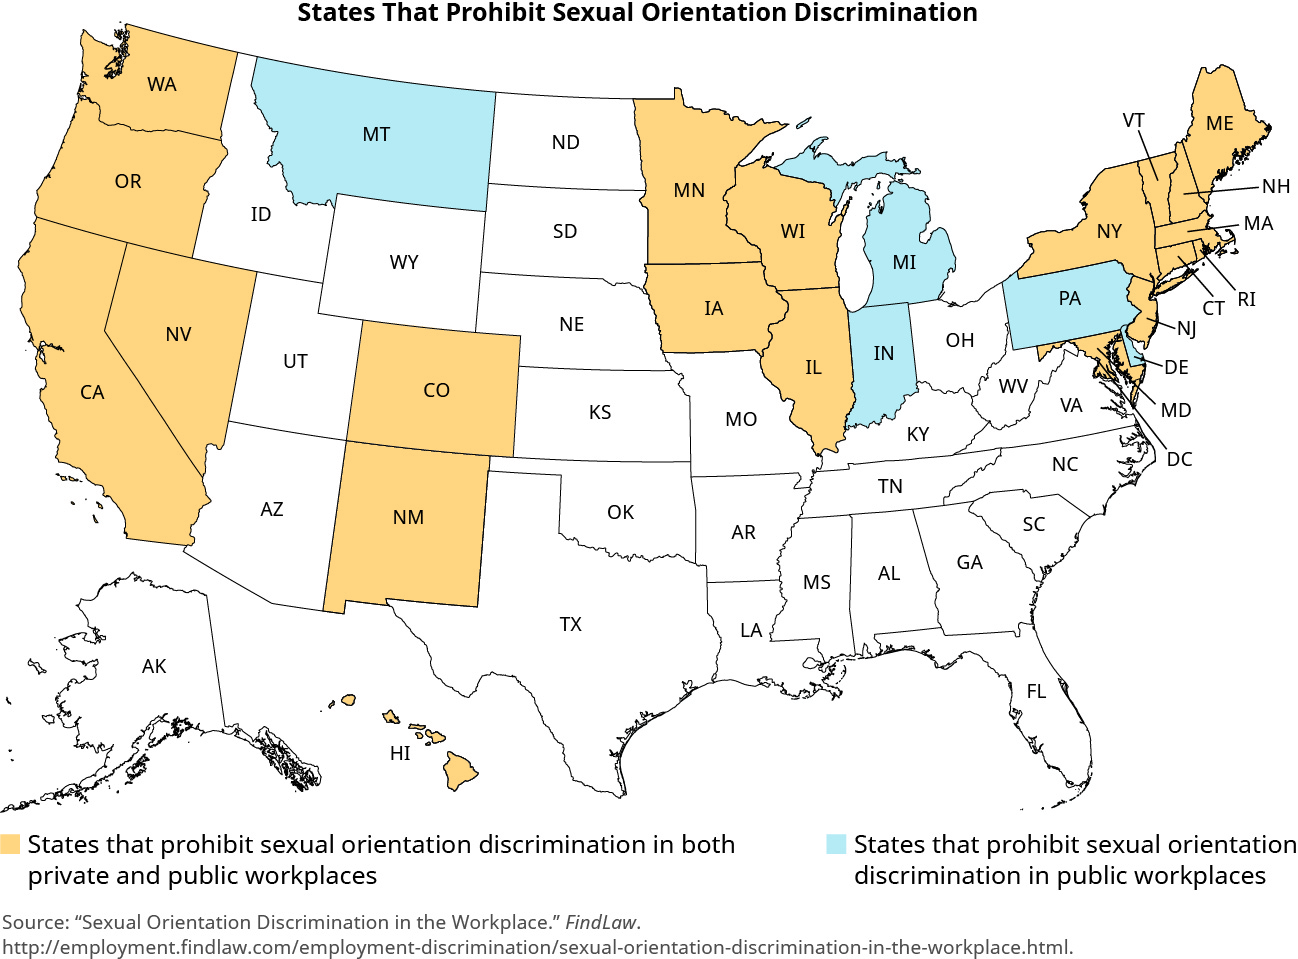 A map of the United States is titled “States the Prohibit Sexual Orientation Discrimination.” The states are colored in to show states that prohibit sexual orientation discrimination in public and private workplaces. States that prohibit sexual orientation discrimination in both private and public workplaces are California, Colorado, Connecticut, Hawaii, Illinois, Iowa, Maine, Maryland, Massachusetts, Minnesota, Nevada, New Hampshire, New Jersey, New Mexico, New York, Oregon, Rhode Island, Vermont, Washington, and Wisconsin. States that prohibit sexual orientation discrimination in public workplaces are Delaware, Indiana, Michigan, Montana, and Pennsylvania.